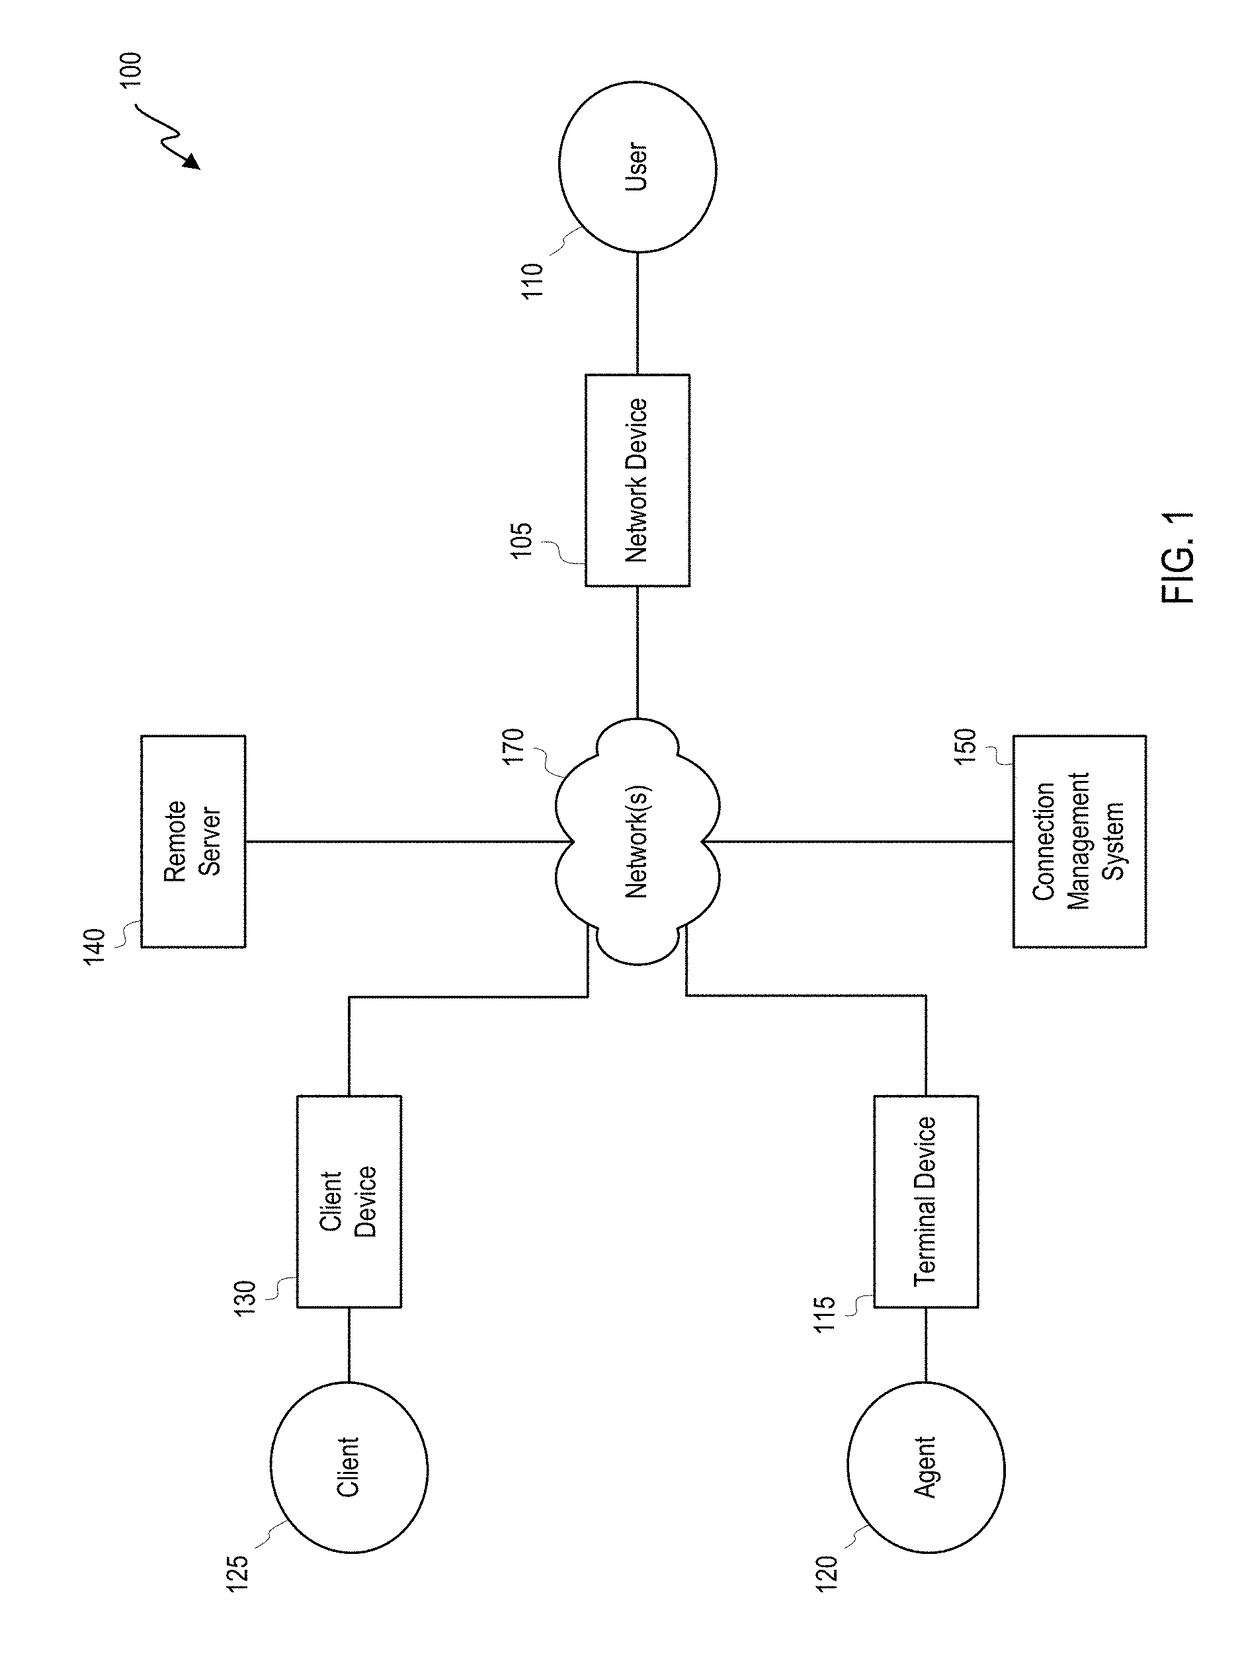 System and method for applying tracing tools for network locations